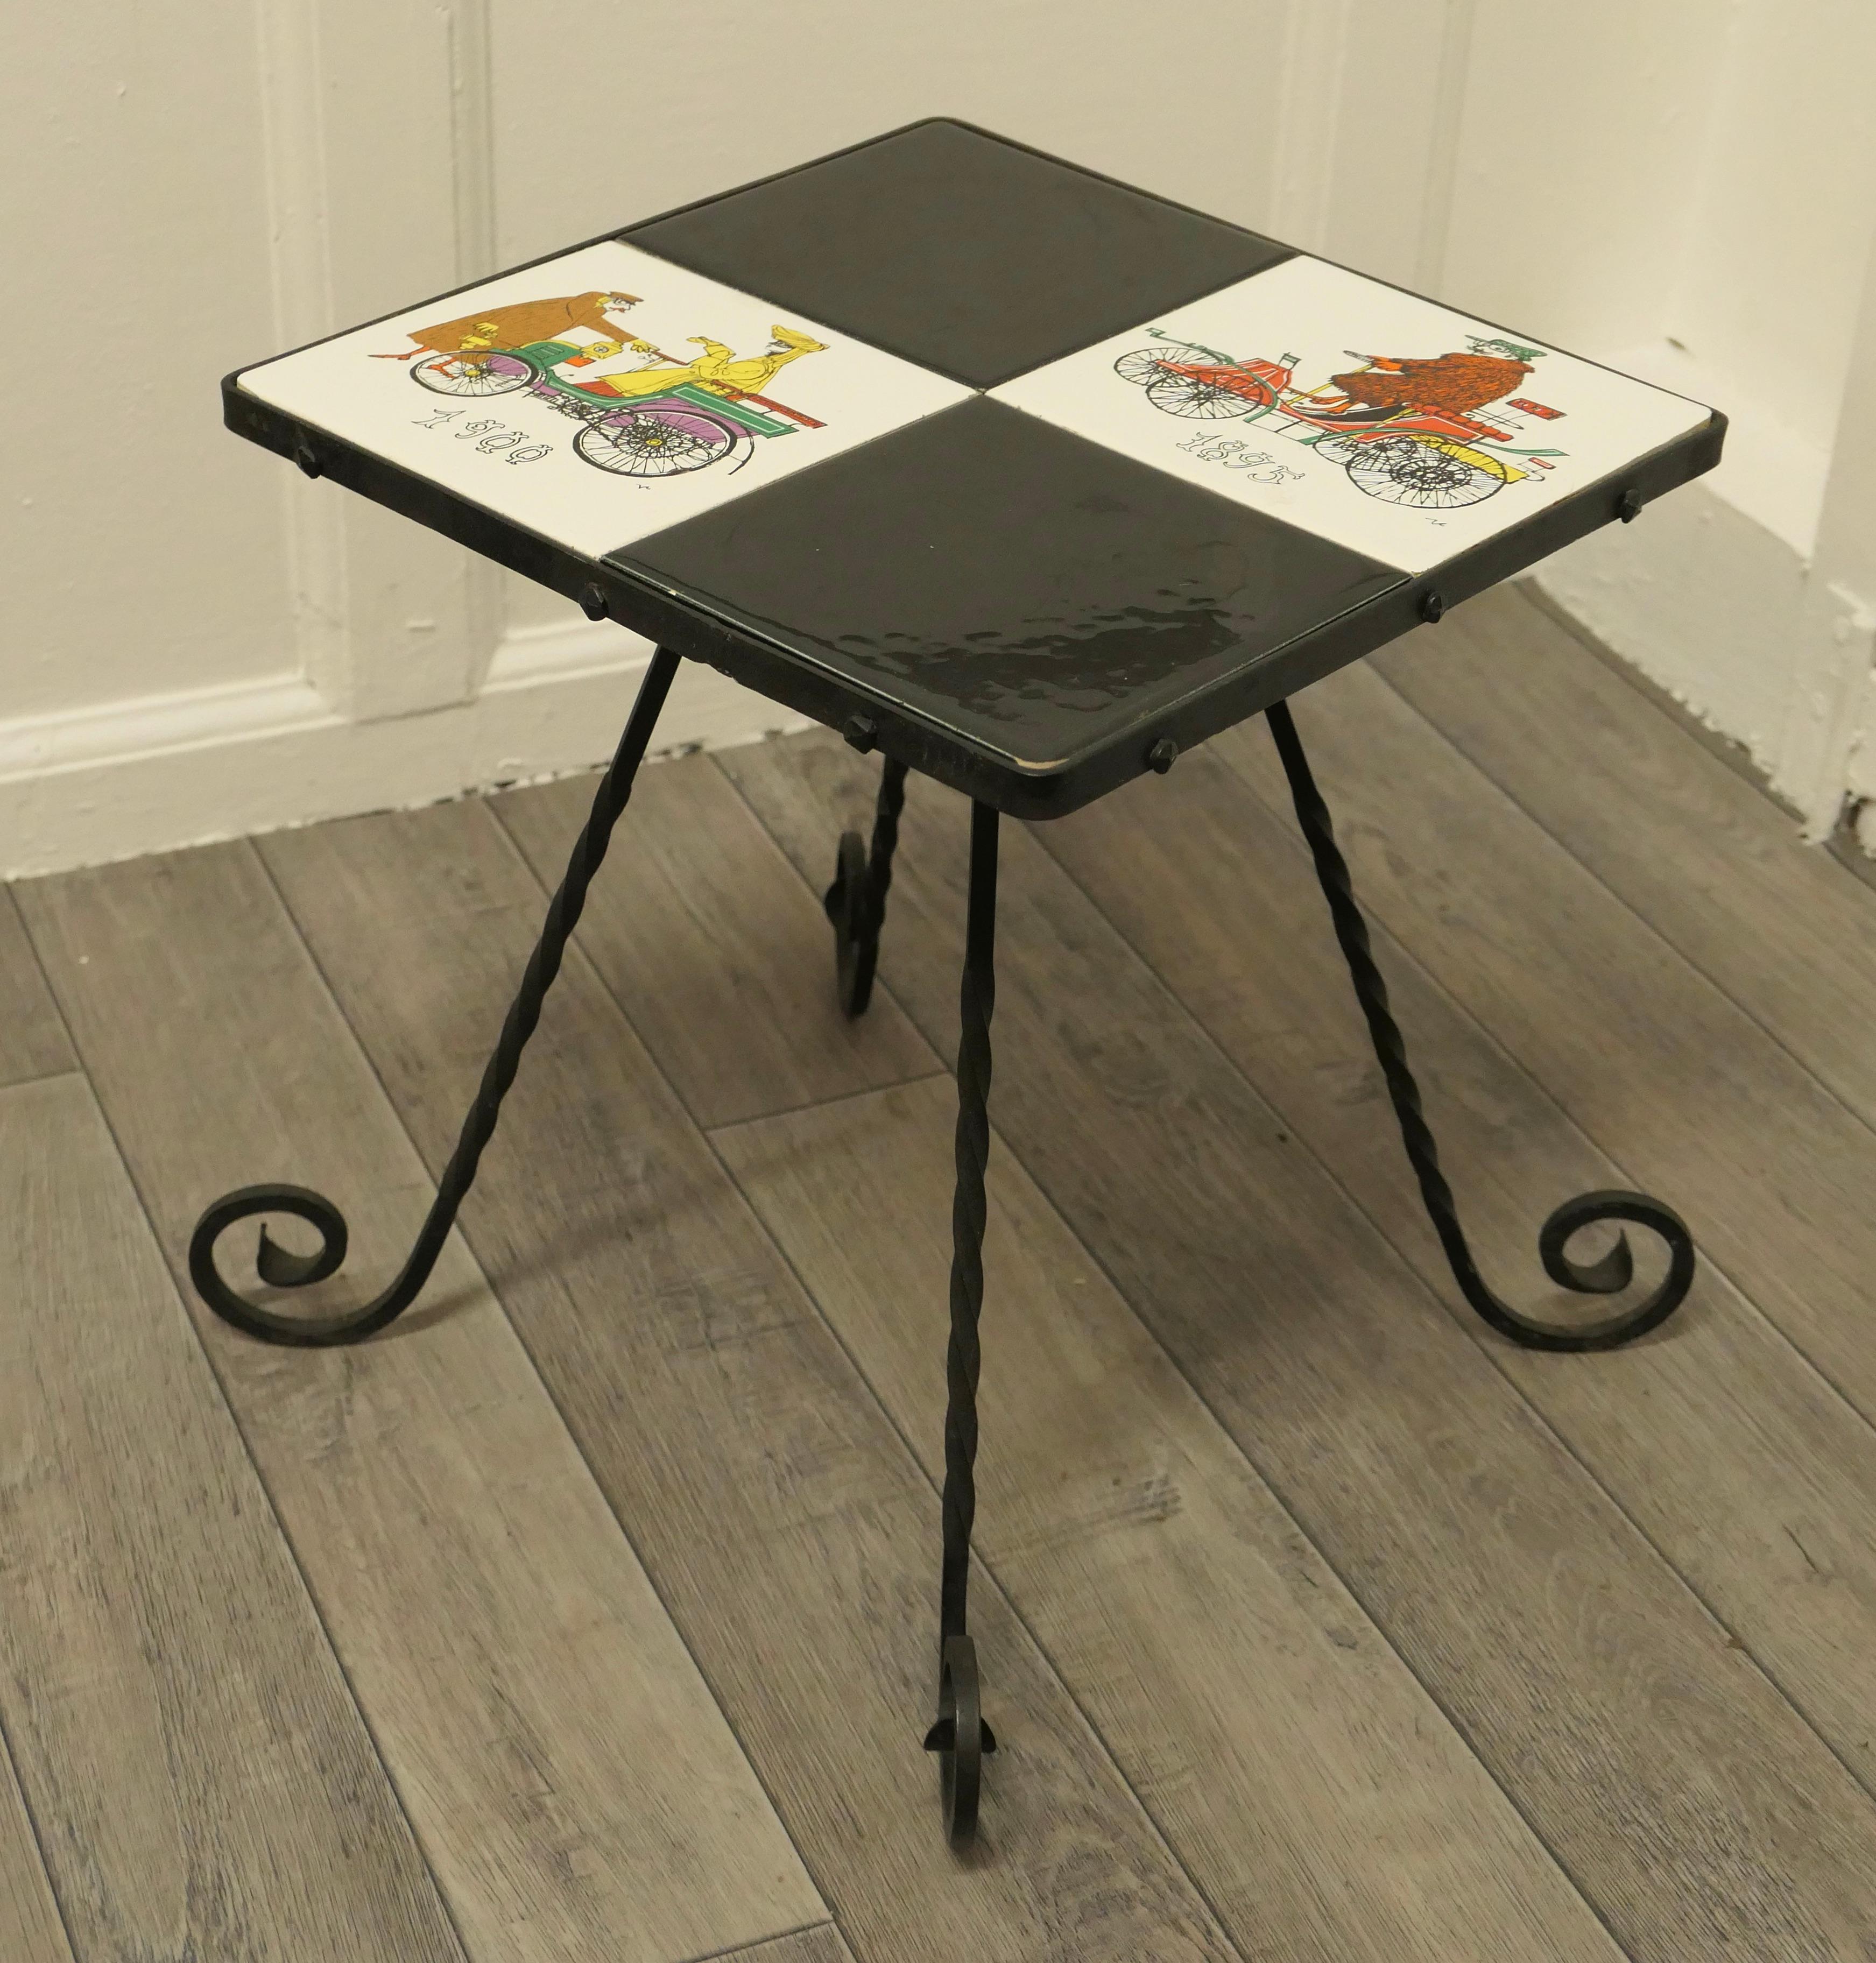 1960s Retro, “Wacky Races” Tiled Occasional Table  For Sale 2